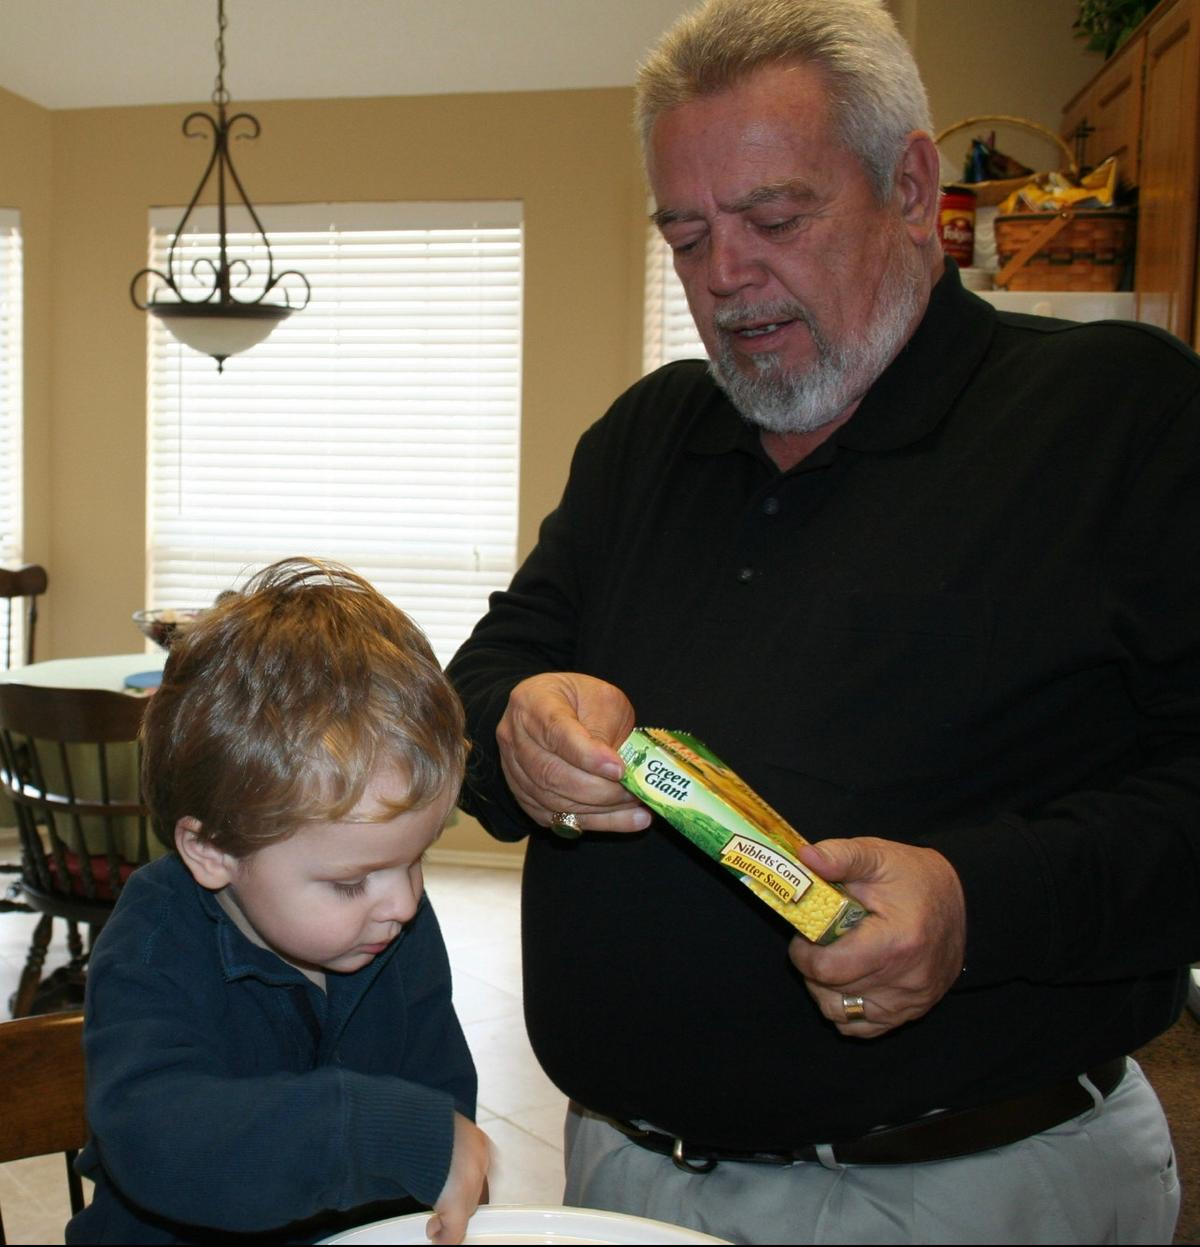 Jacob and his grandpa trying to cook when he was very little. (Courtesy of <a href="https://www.facebook.com/poppopsdandydog/">Jacob Irving</a>)